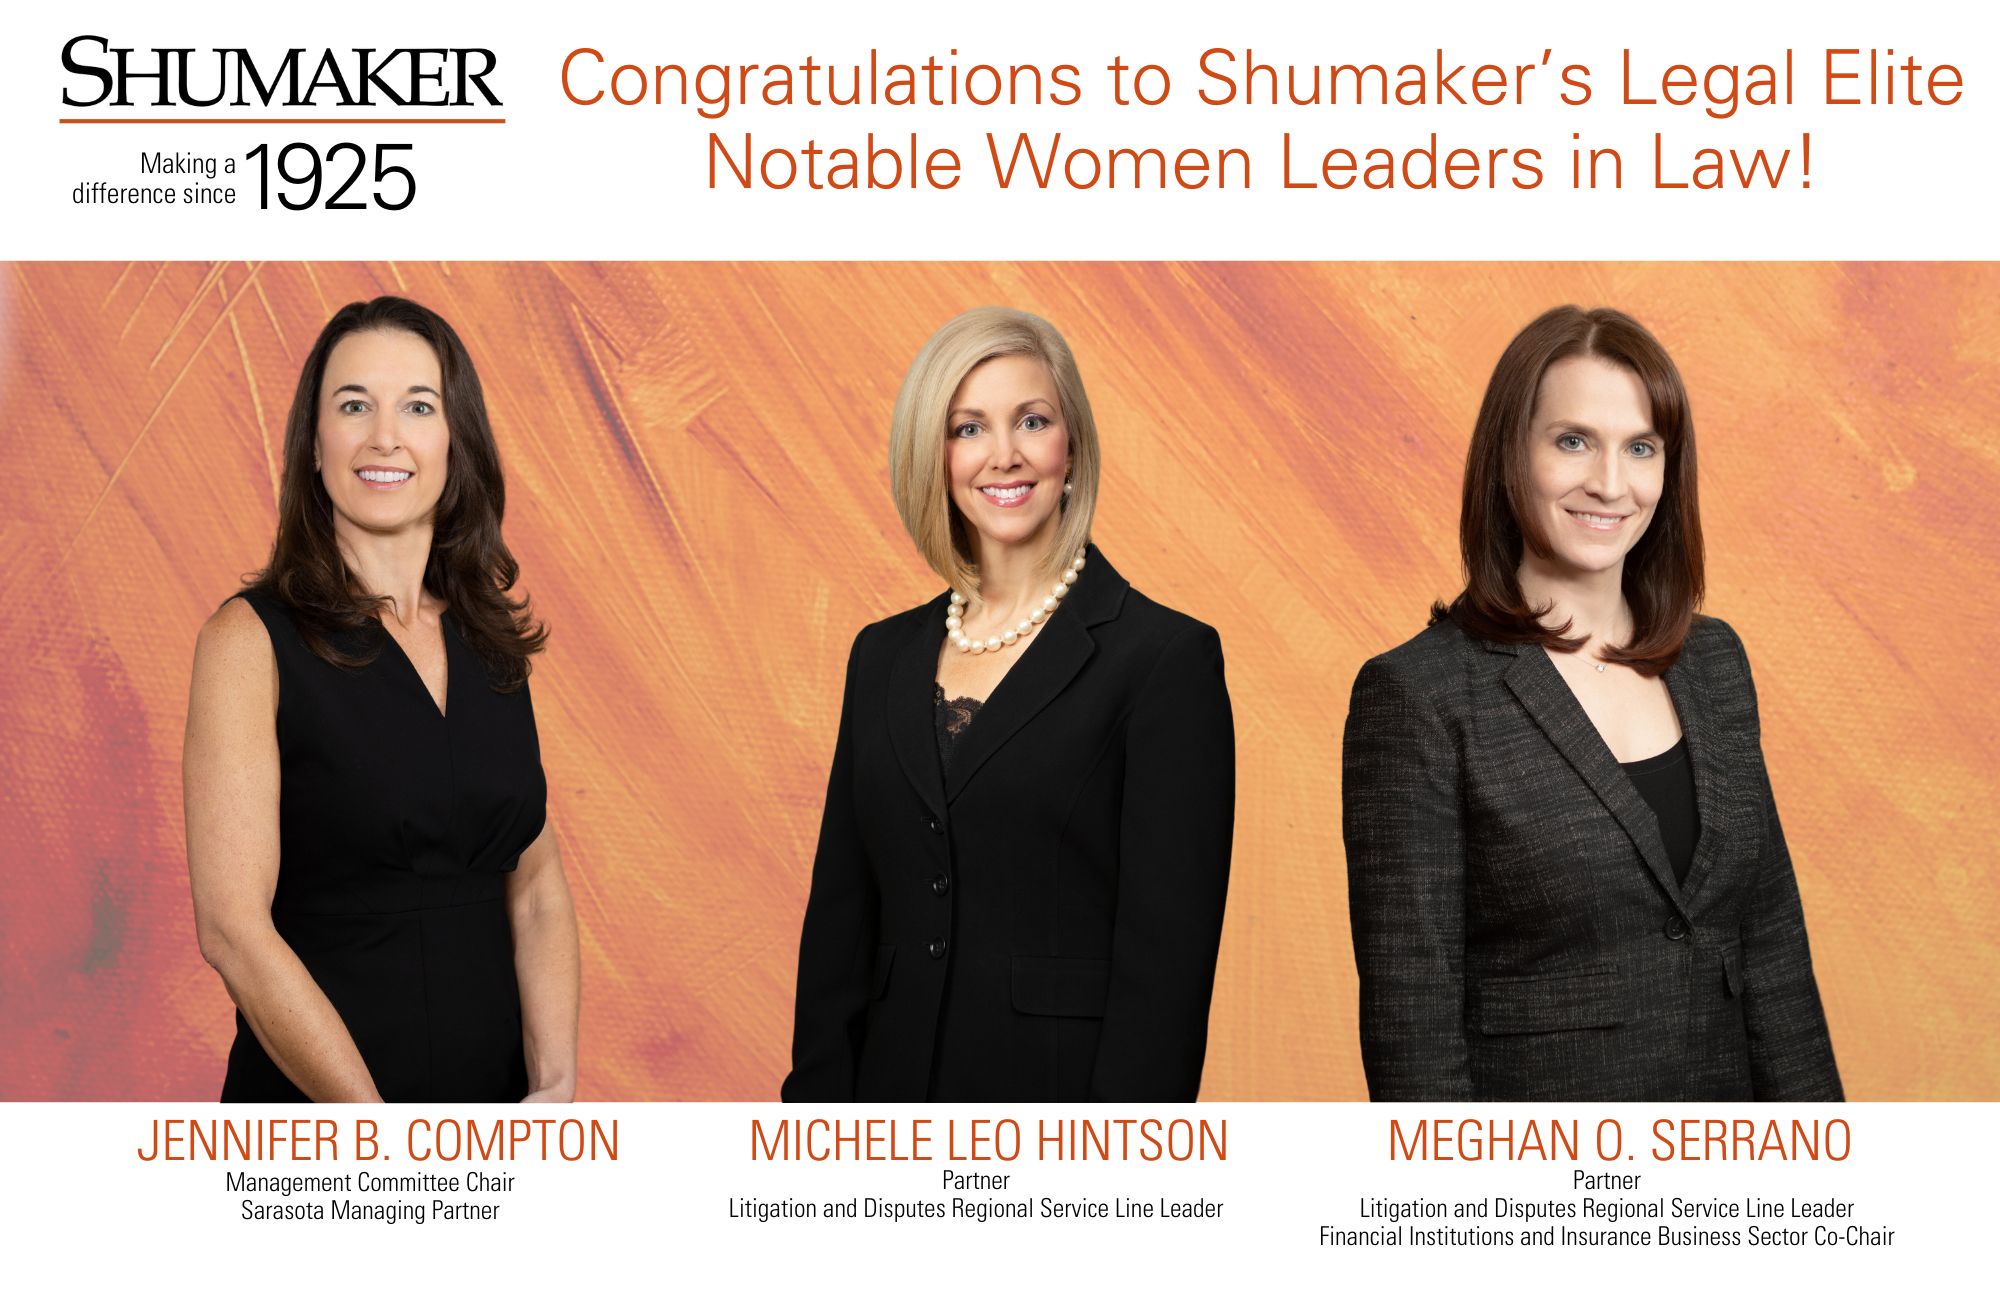 Shumaker Trio Recognized as Notable Women Leaders in Law 